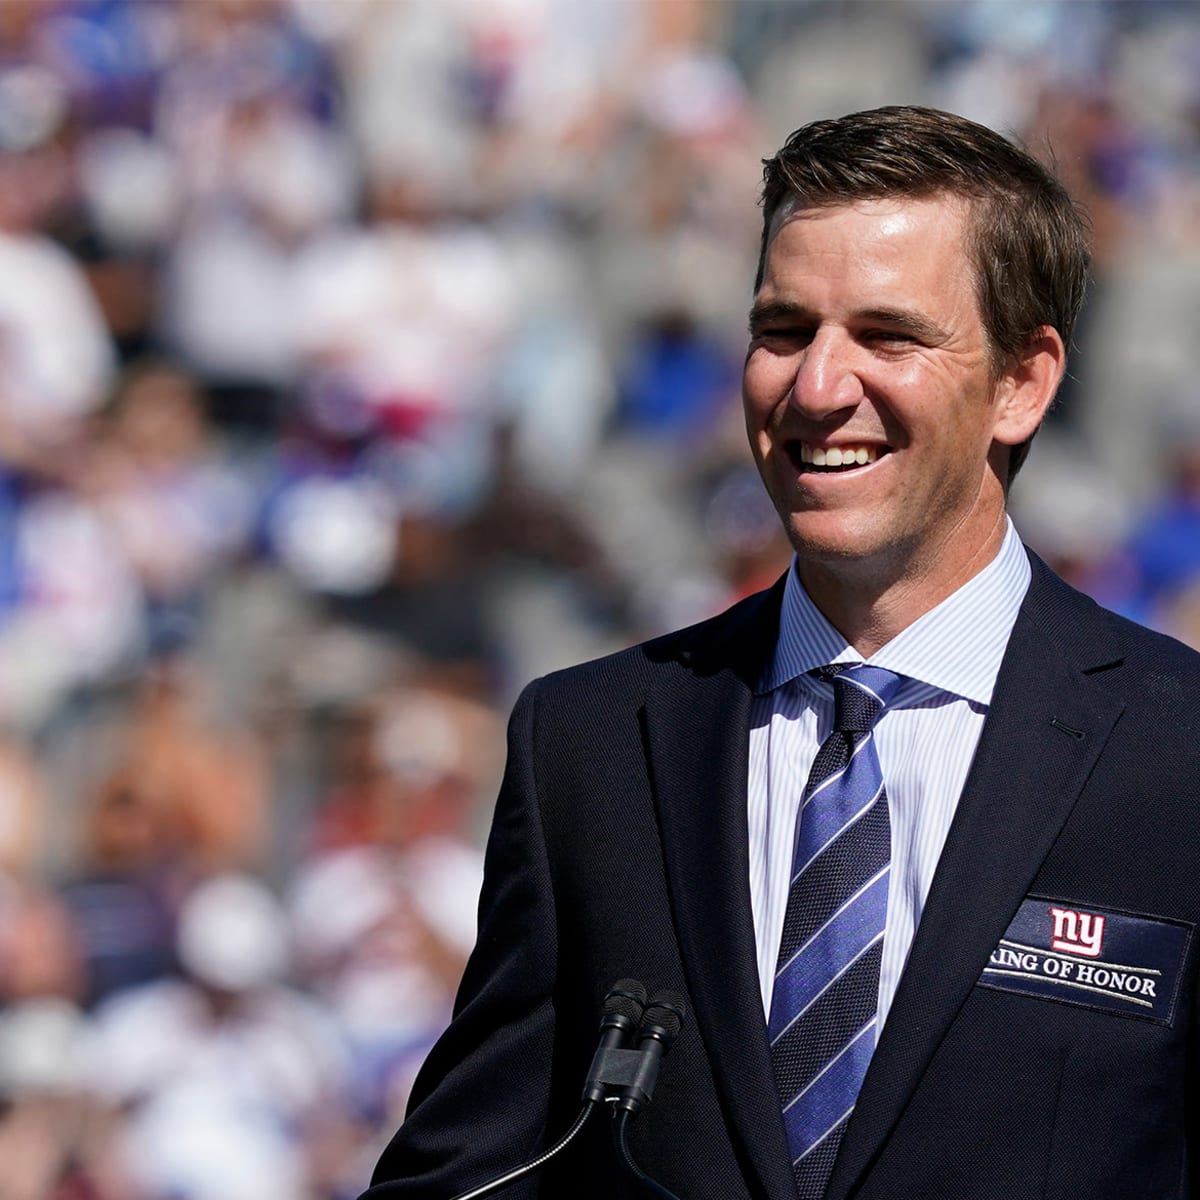 Eli Manning Sends a Message to NHL Legend Upon Jersey Retirement